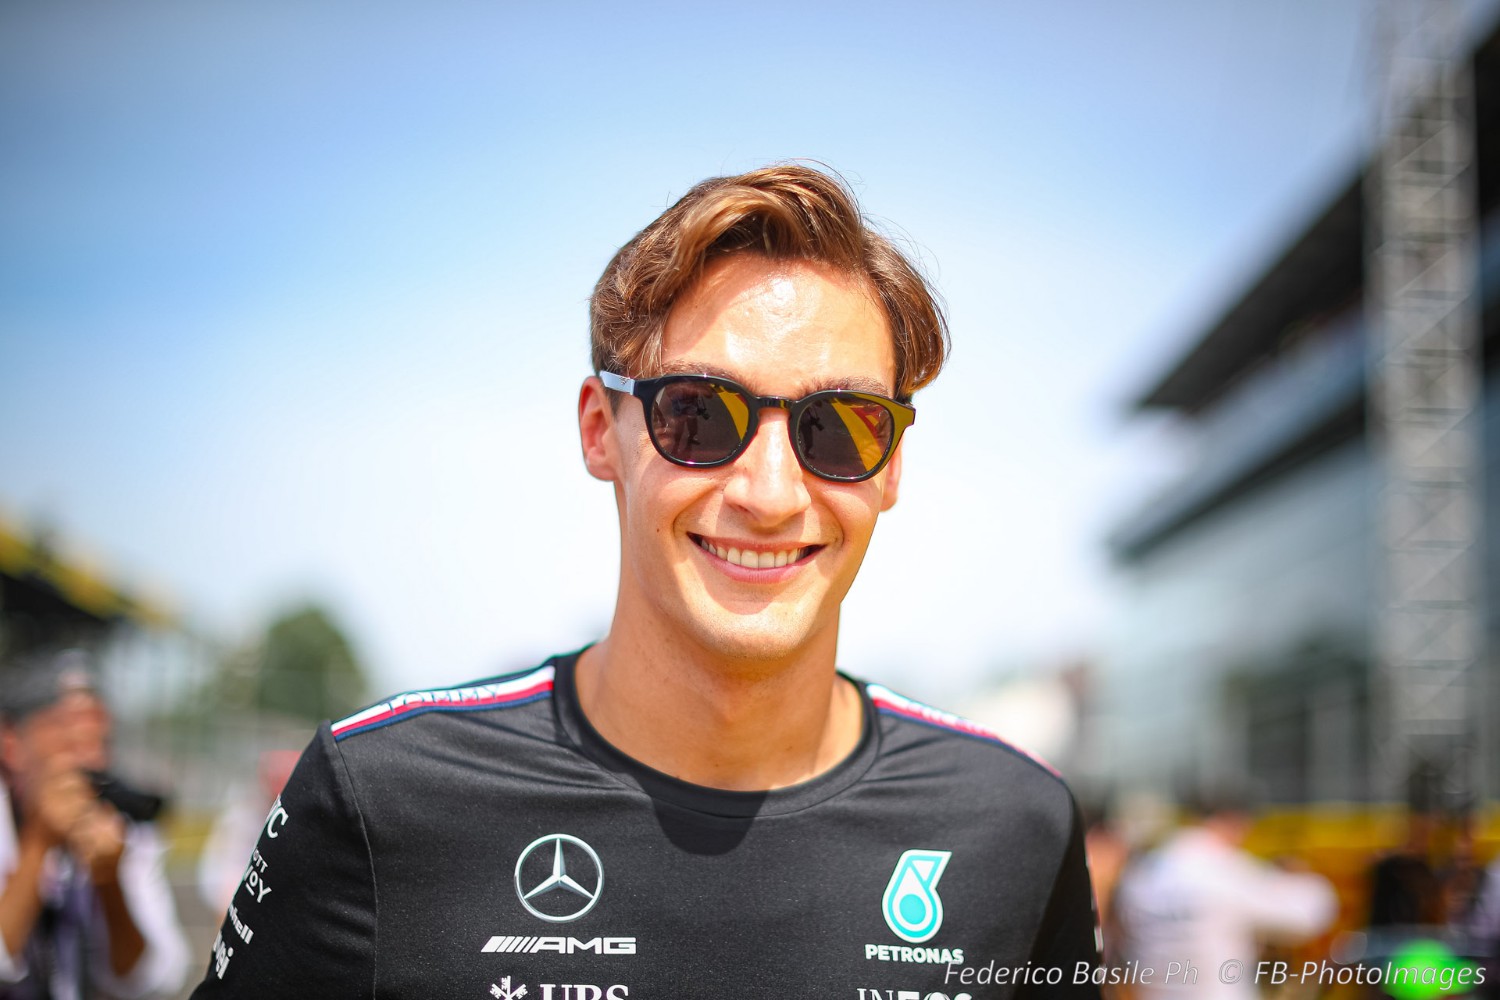 #63 George Russell, (GRB) AMG Mercedes Ineos during the Italian GP, Monza 31 August-3 September 2023 Formula 1 World championship 2023.